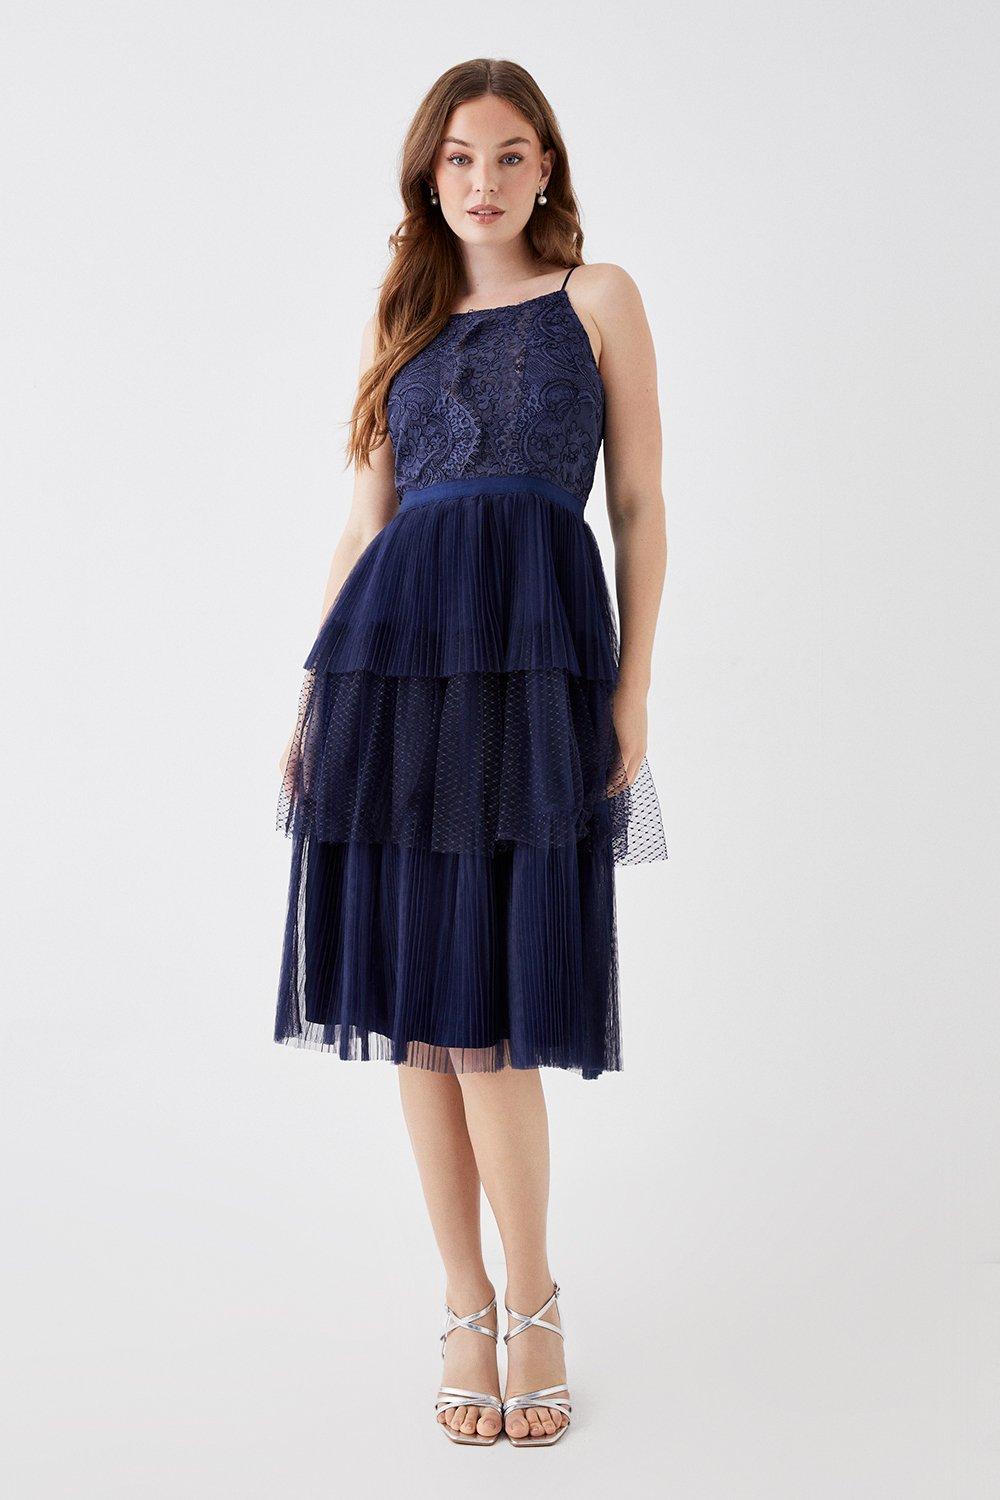 Debut Strappy Lace Bodice Tiered Mesh Bridesmaids Dress